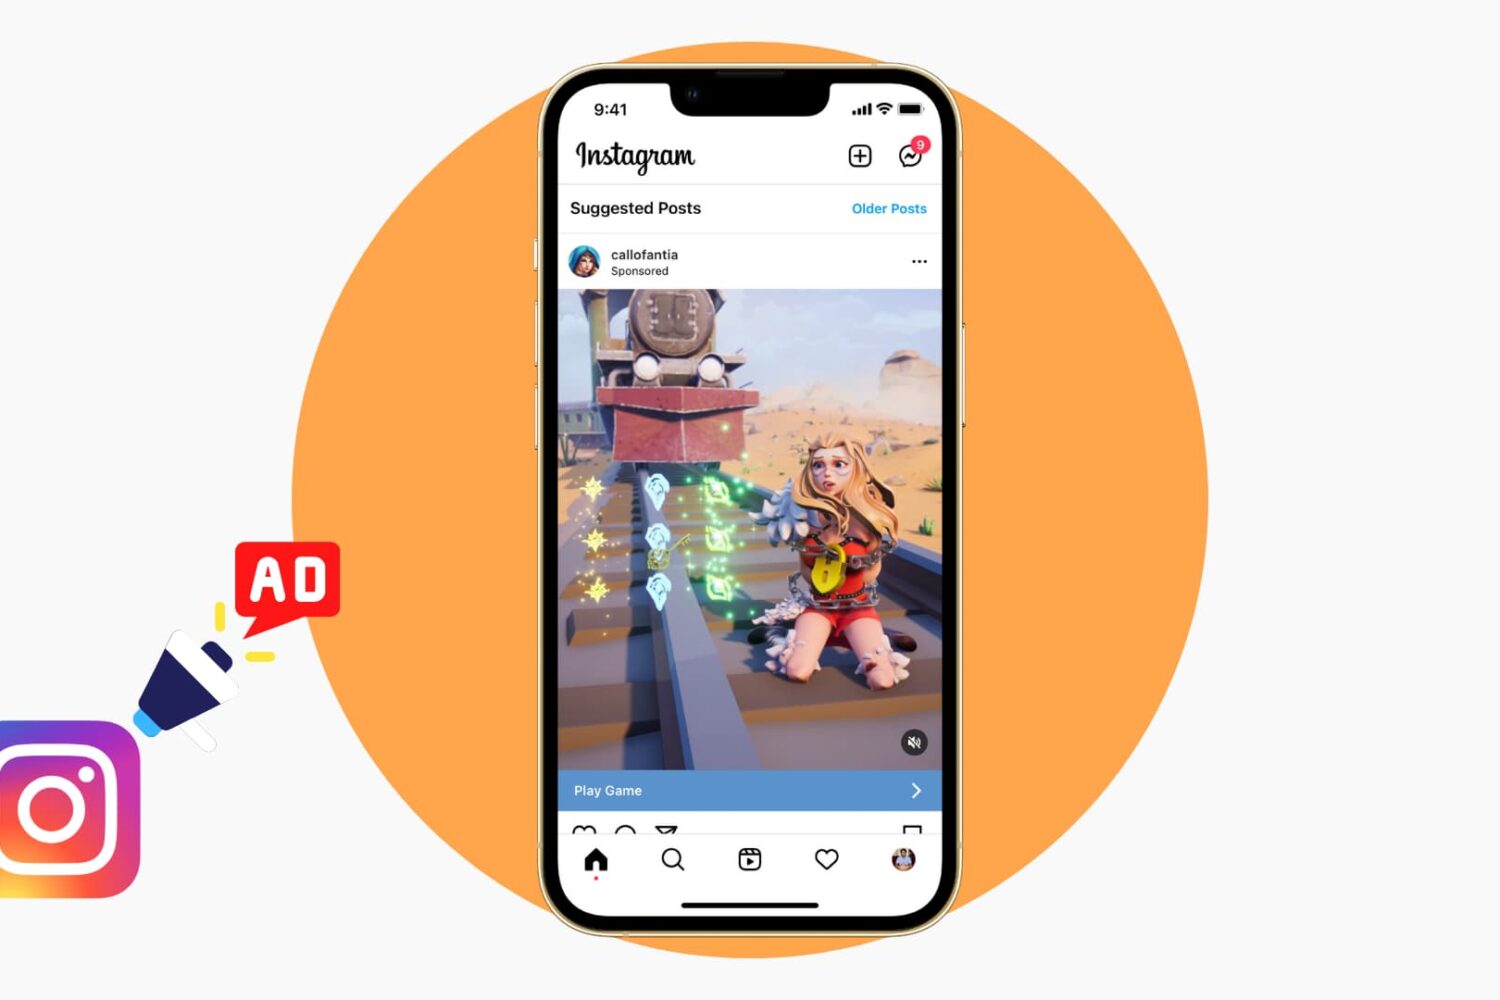 How to block and stop seeing ads on Instagram